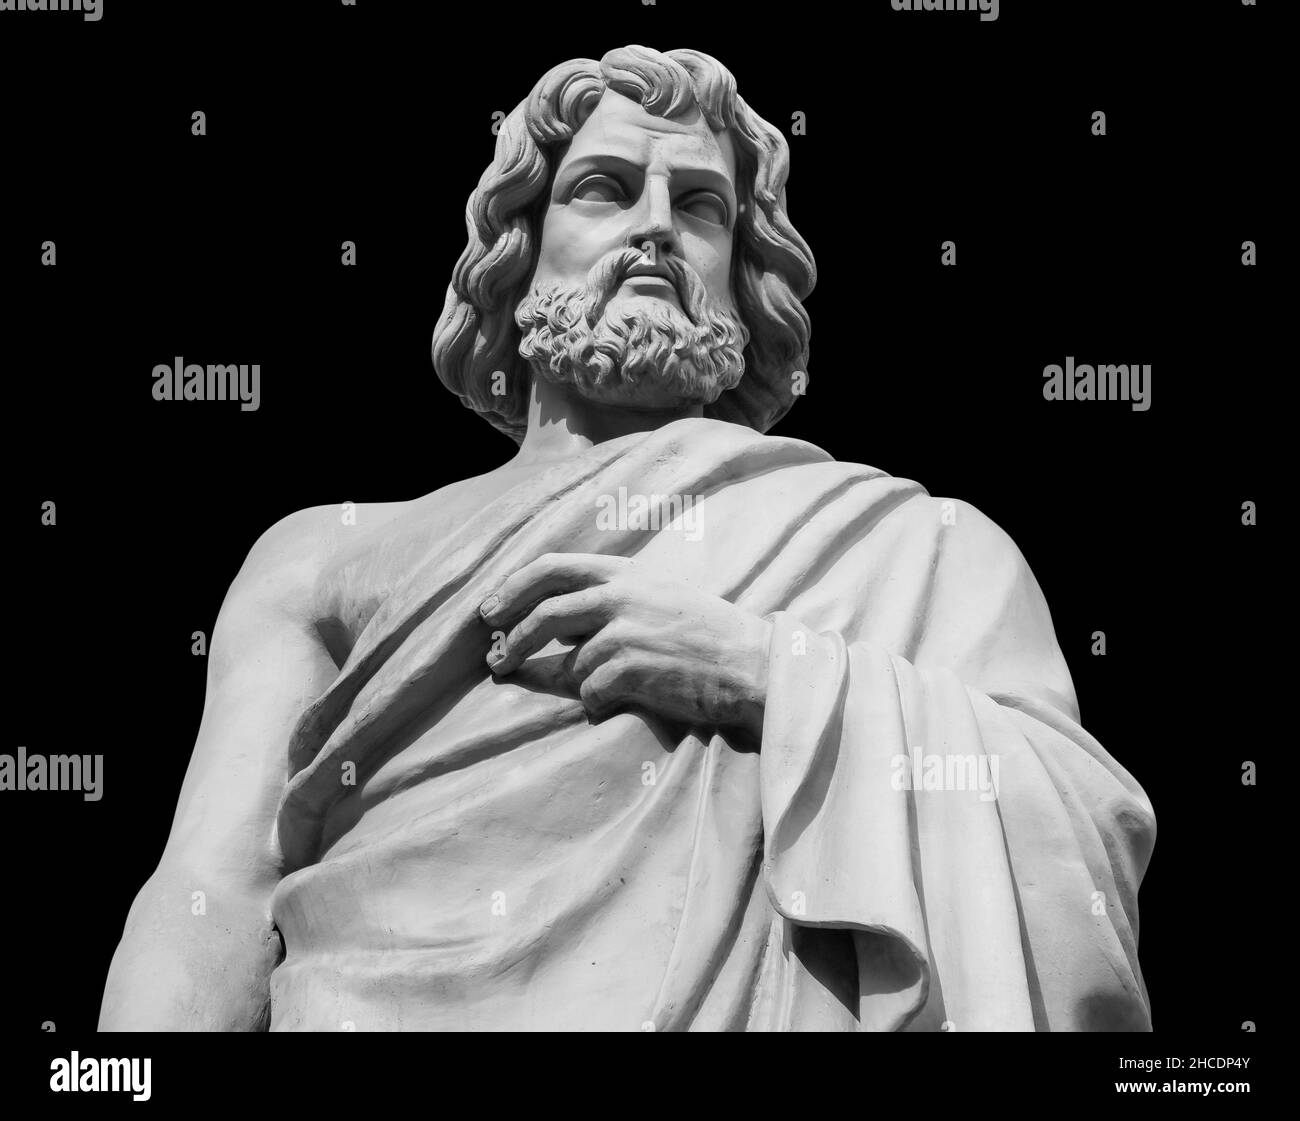 Statue of the biblical inventor Daedalus. Ancient sculpture isolated on black background. Classic antiquity man portrait Stock Photo